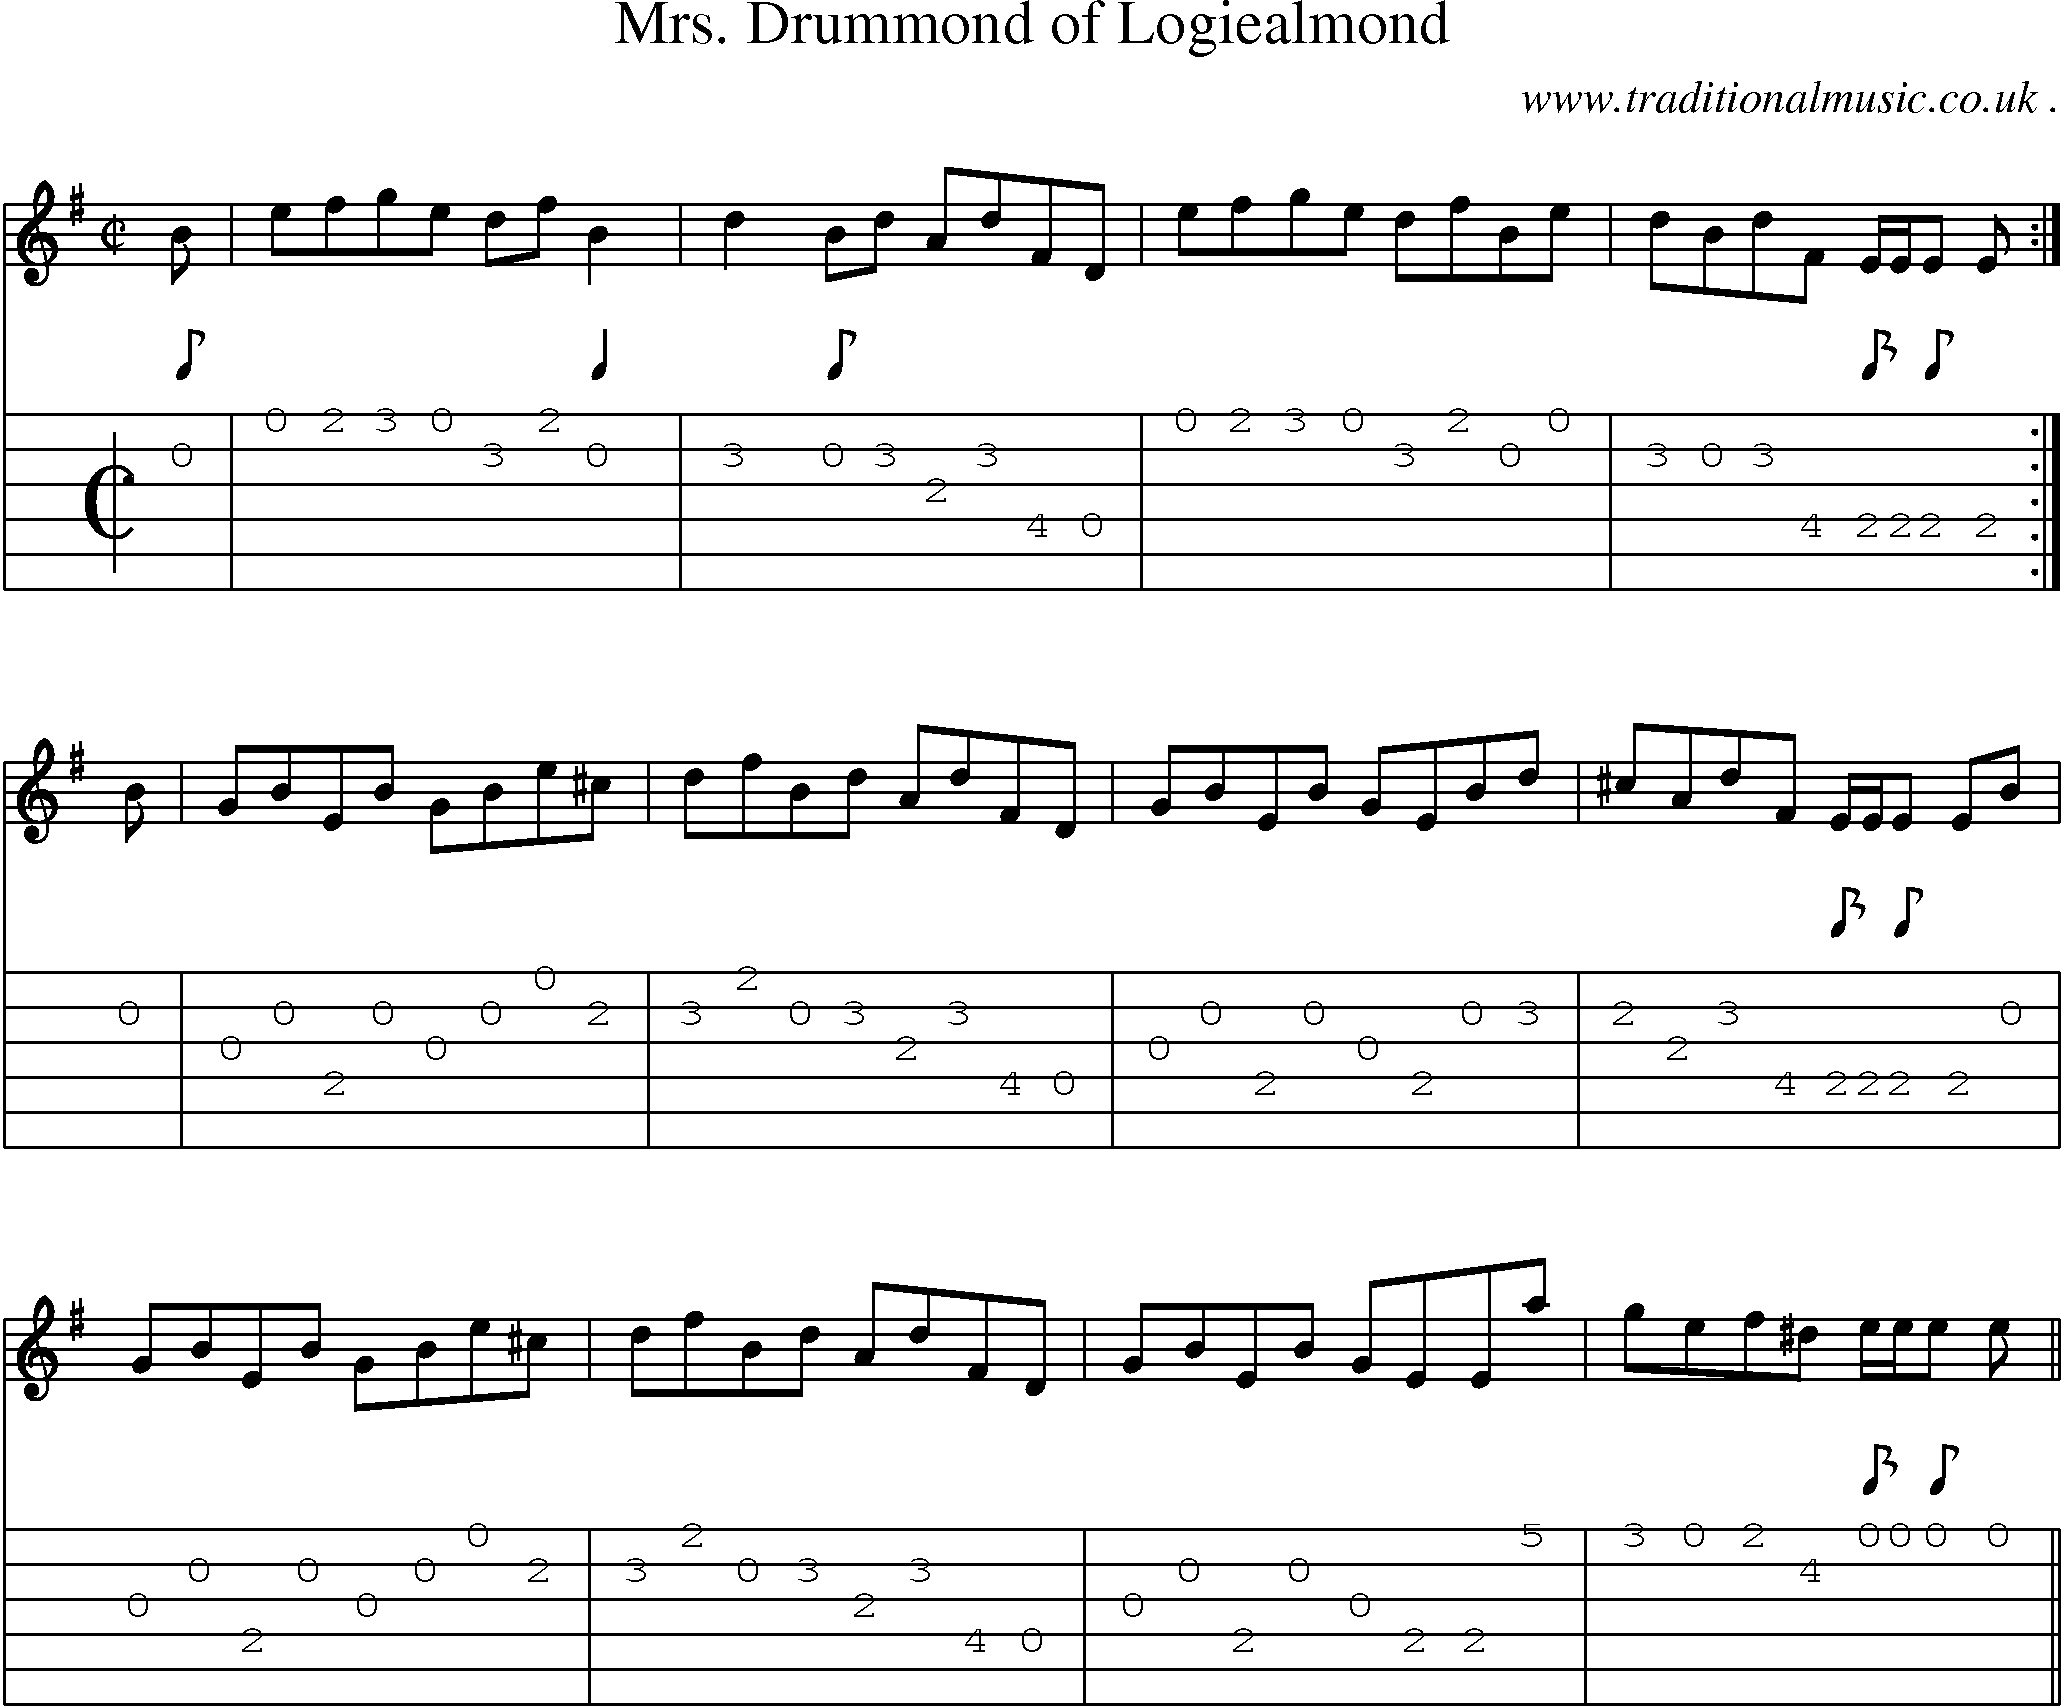 Sheet-music  score, Chords and Guitar Tabs for Mrs Drummond Of Logiealmond